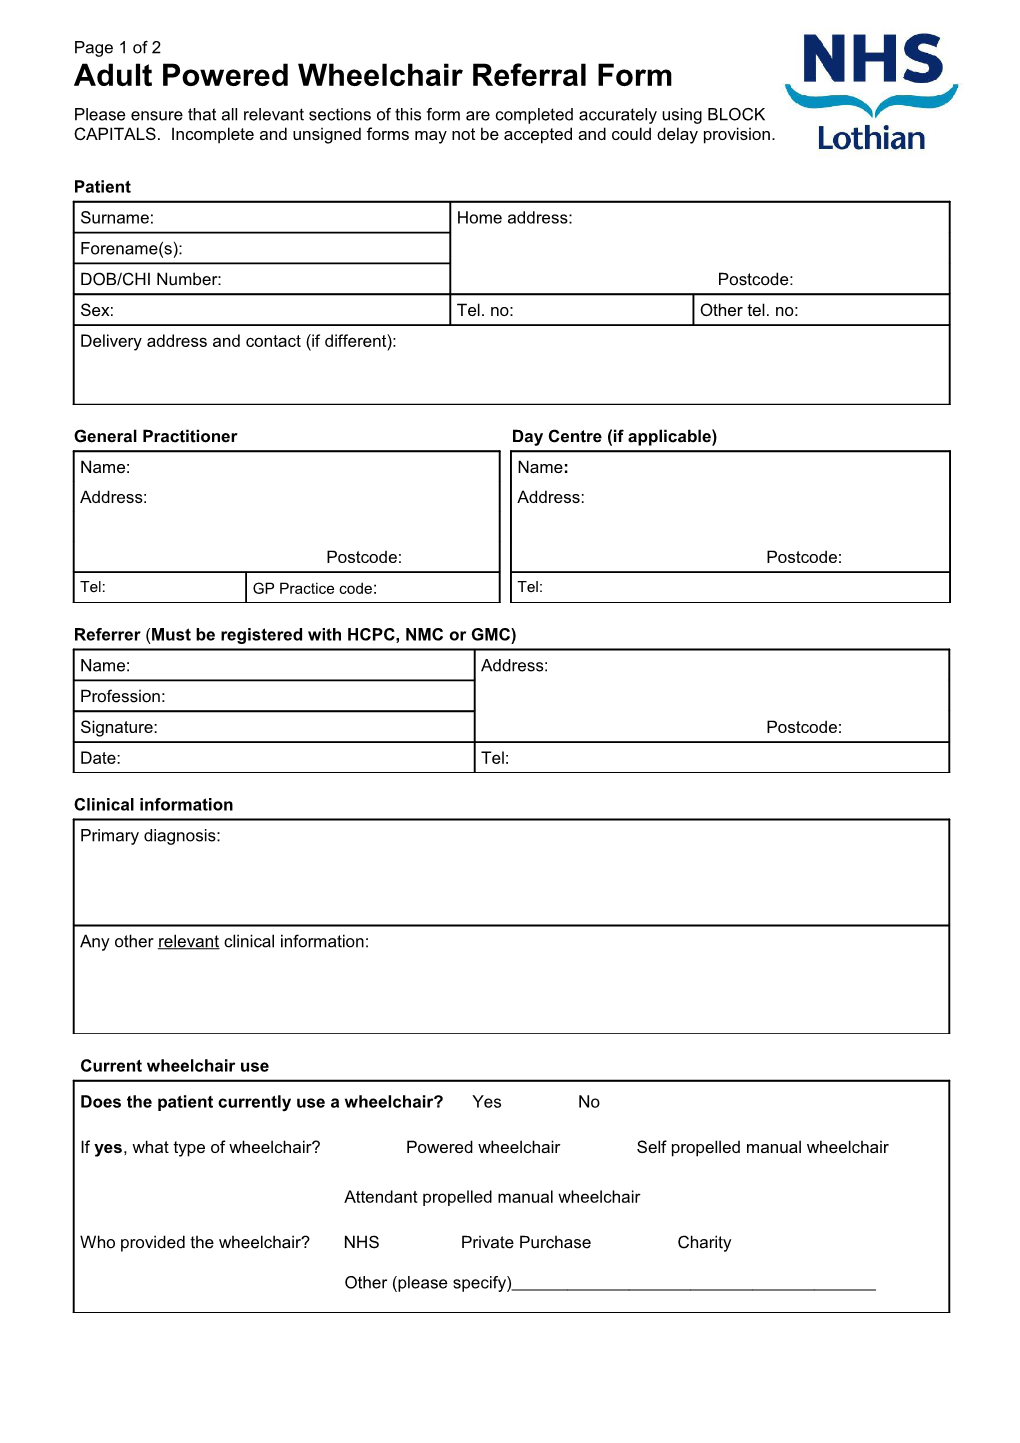 Page 1 of 2Powered Wheelchair Referral Form